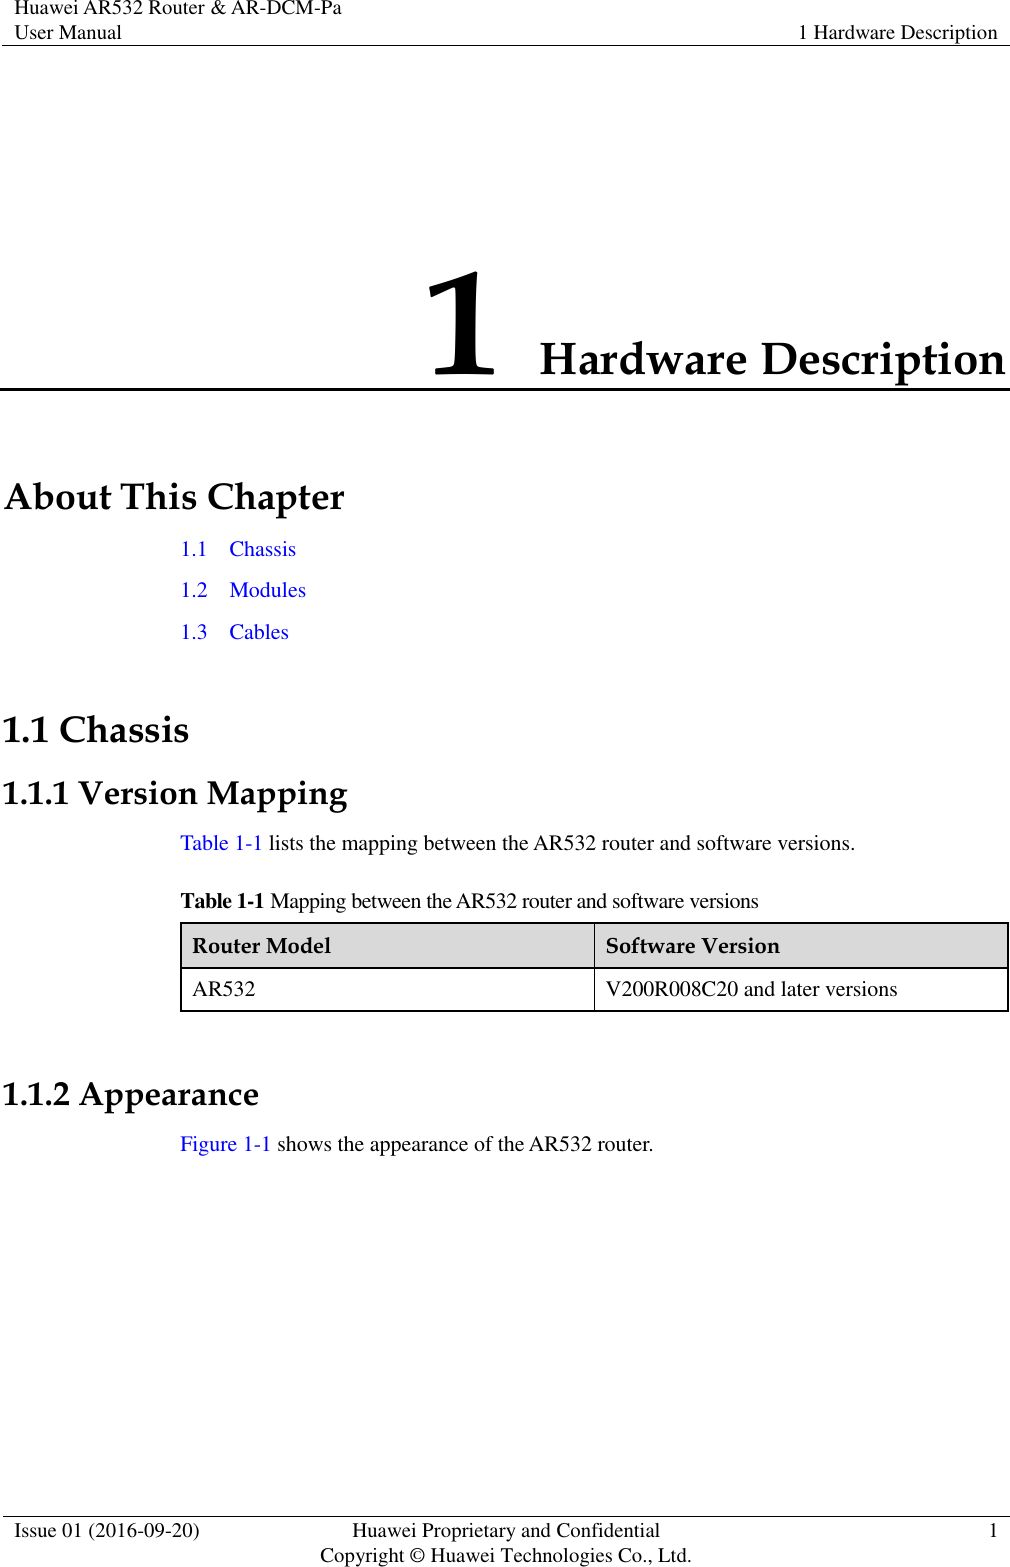 Huawei AR532 Router &amp; AR-DCM-Pa User Manual 1 Hardware Description  Issue 01 (2016-09-20) Huawei Proprietary and Confidential                                     Copyright © Huawei Technologies Co., Ltd. 1  1 Hardware Description About This Chapter 1.1    Chassis 1.2    Modules 1.3    Cables 1.1 Chassis 1.1.1 Version Mapping Table 1-1 lists the mapping between the AR532 router and software versions. Table 1-1 Mapping between the AR532 router and software versions Router Model Software Version AR532 V200R008C20 and later versions  1.1.2 Appearance Figure 1-1 shows the appearance of the AR532 router. 